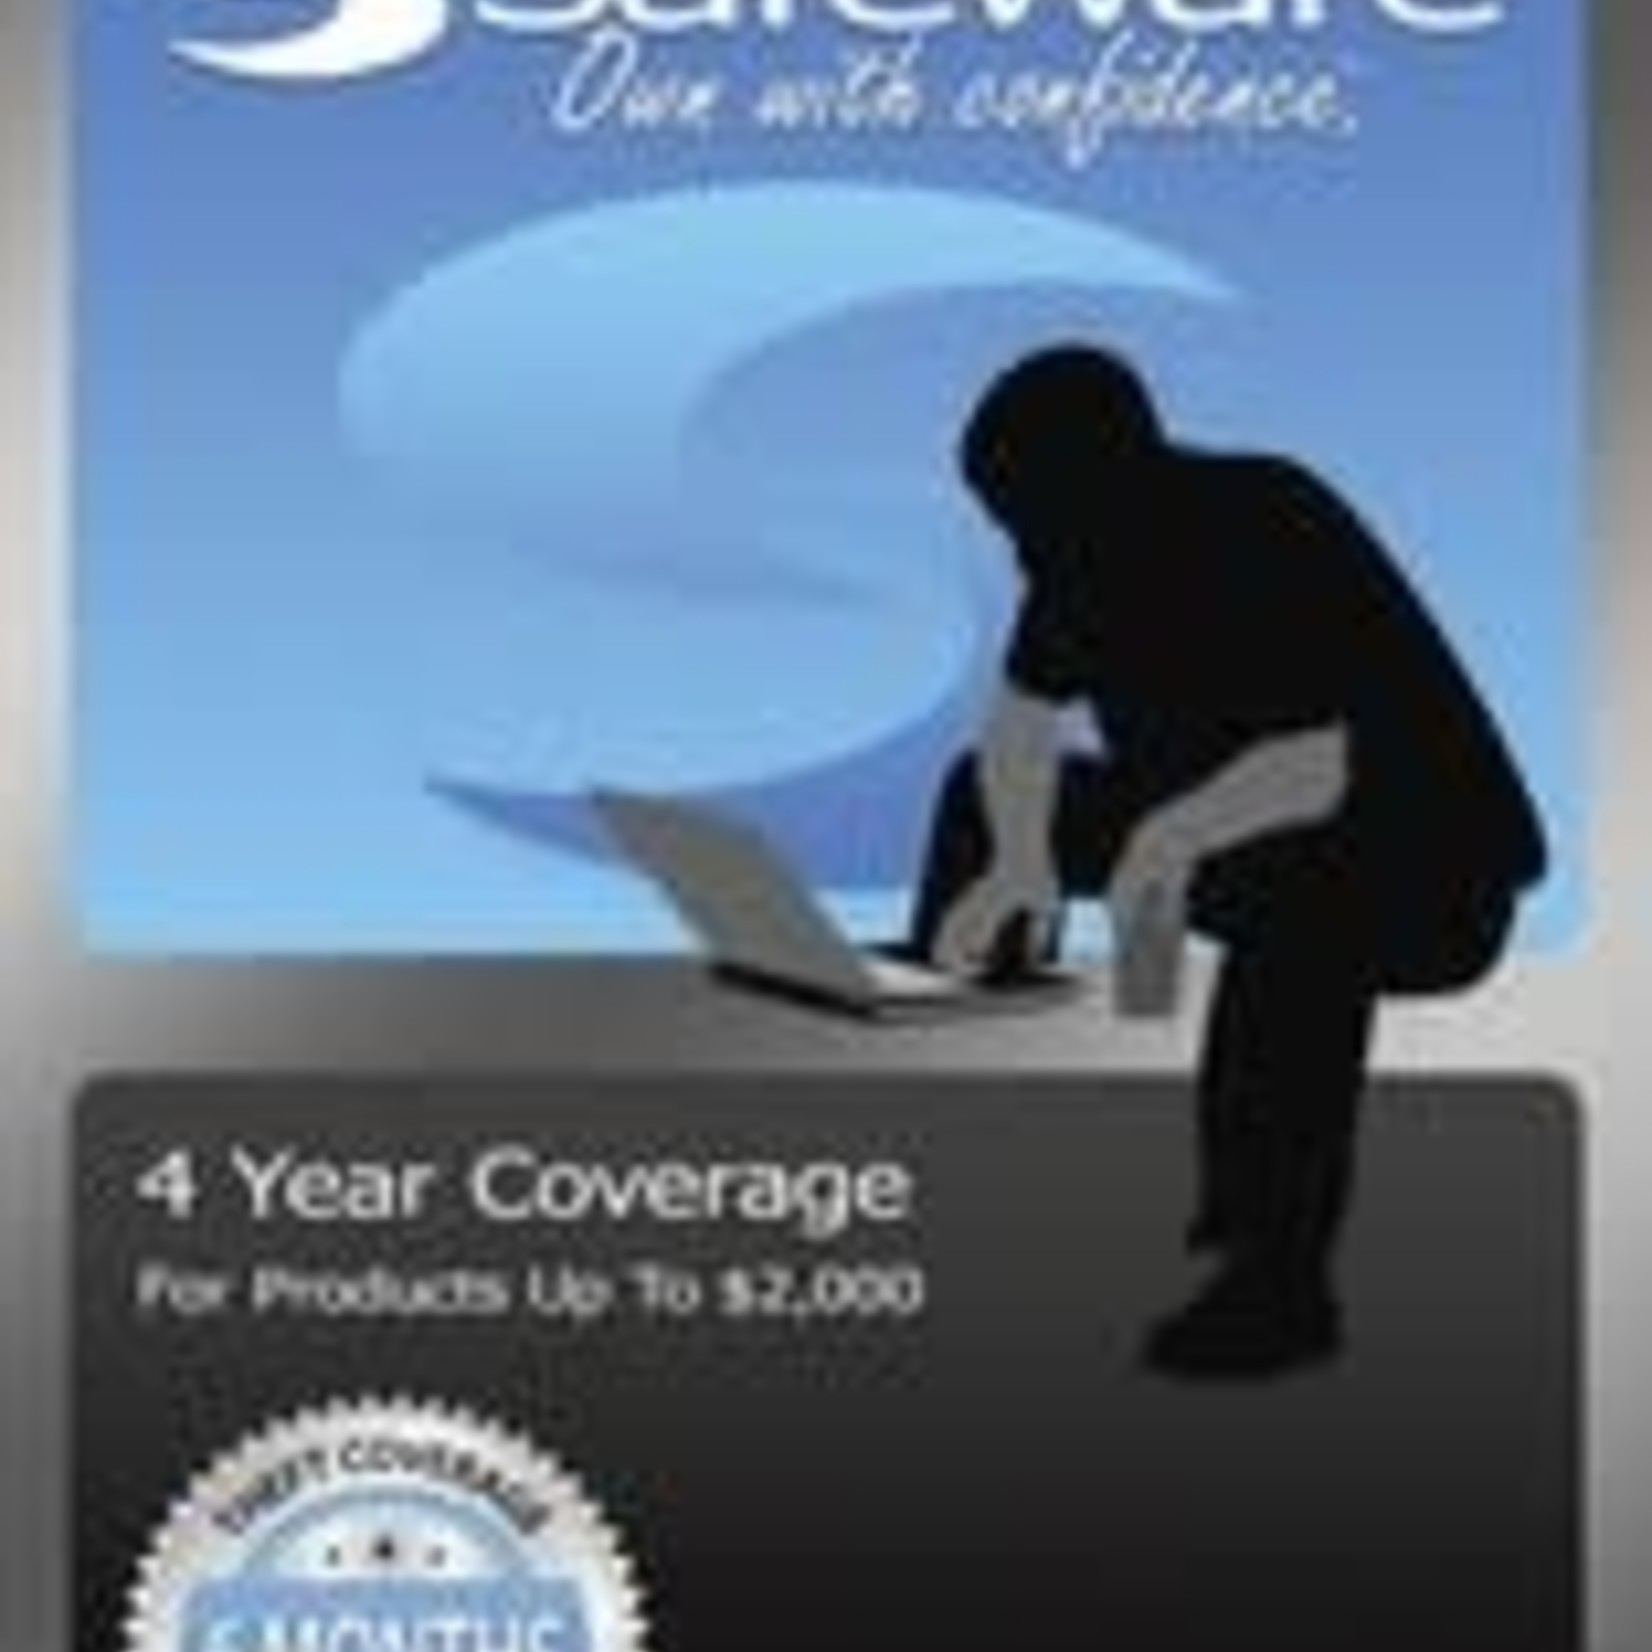 Safeware Safeware 4 Year Coverage for Products up to $2000 Blue Card Accidental Damage and theft coverage.